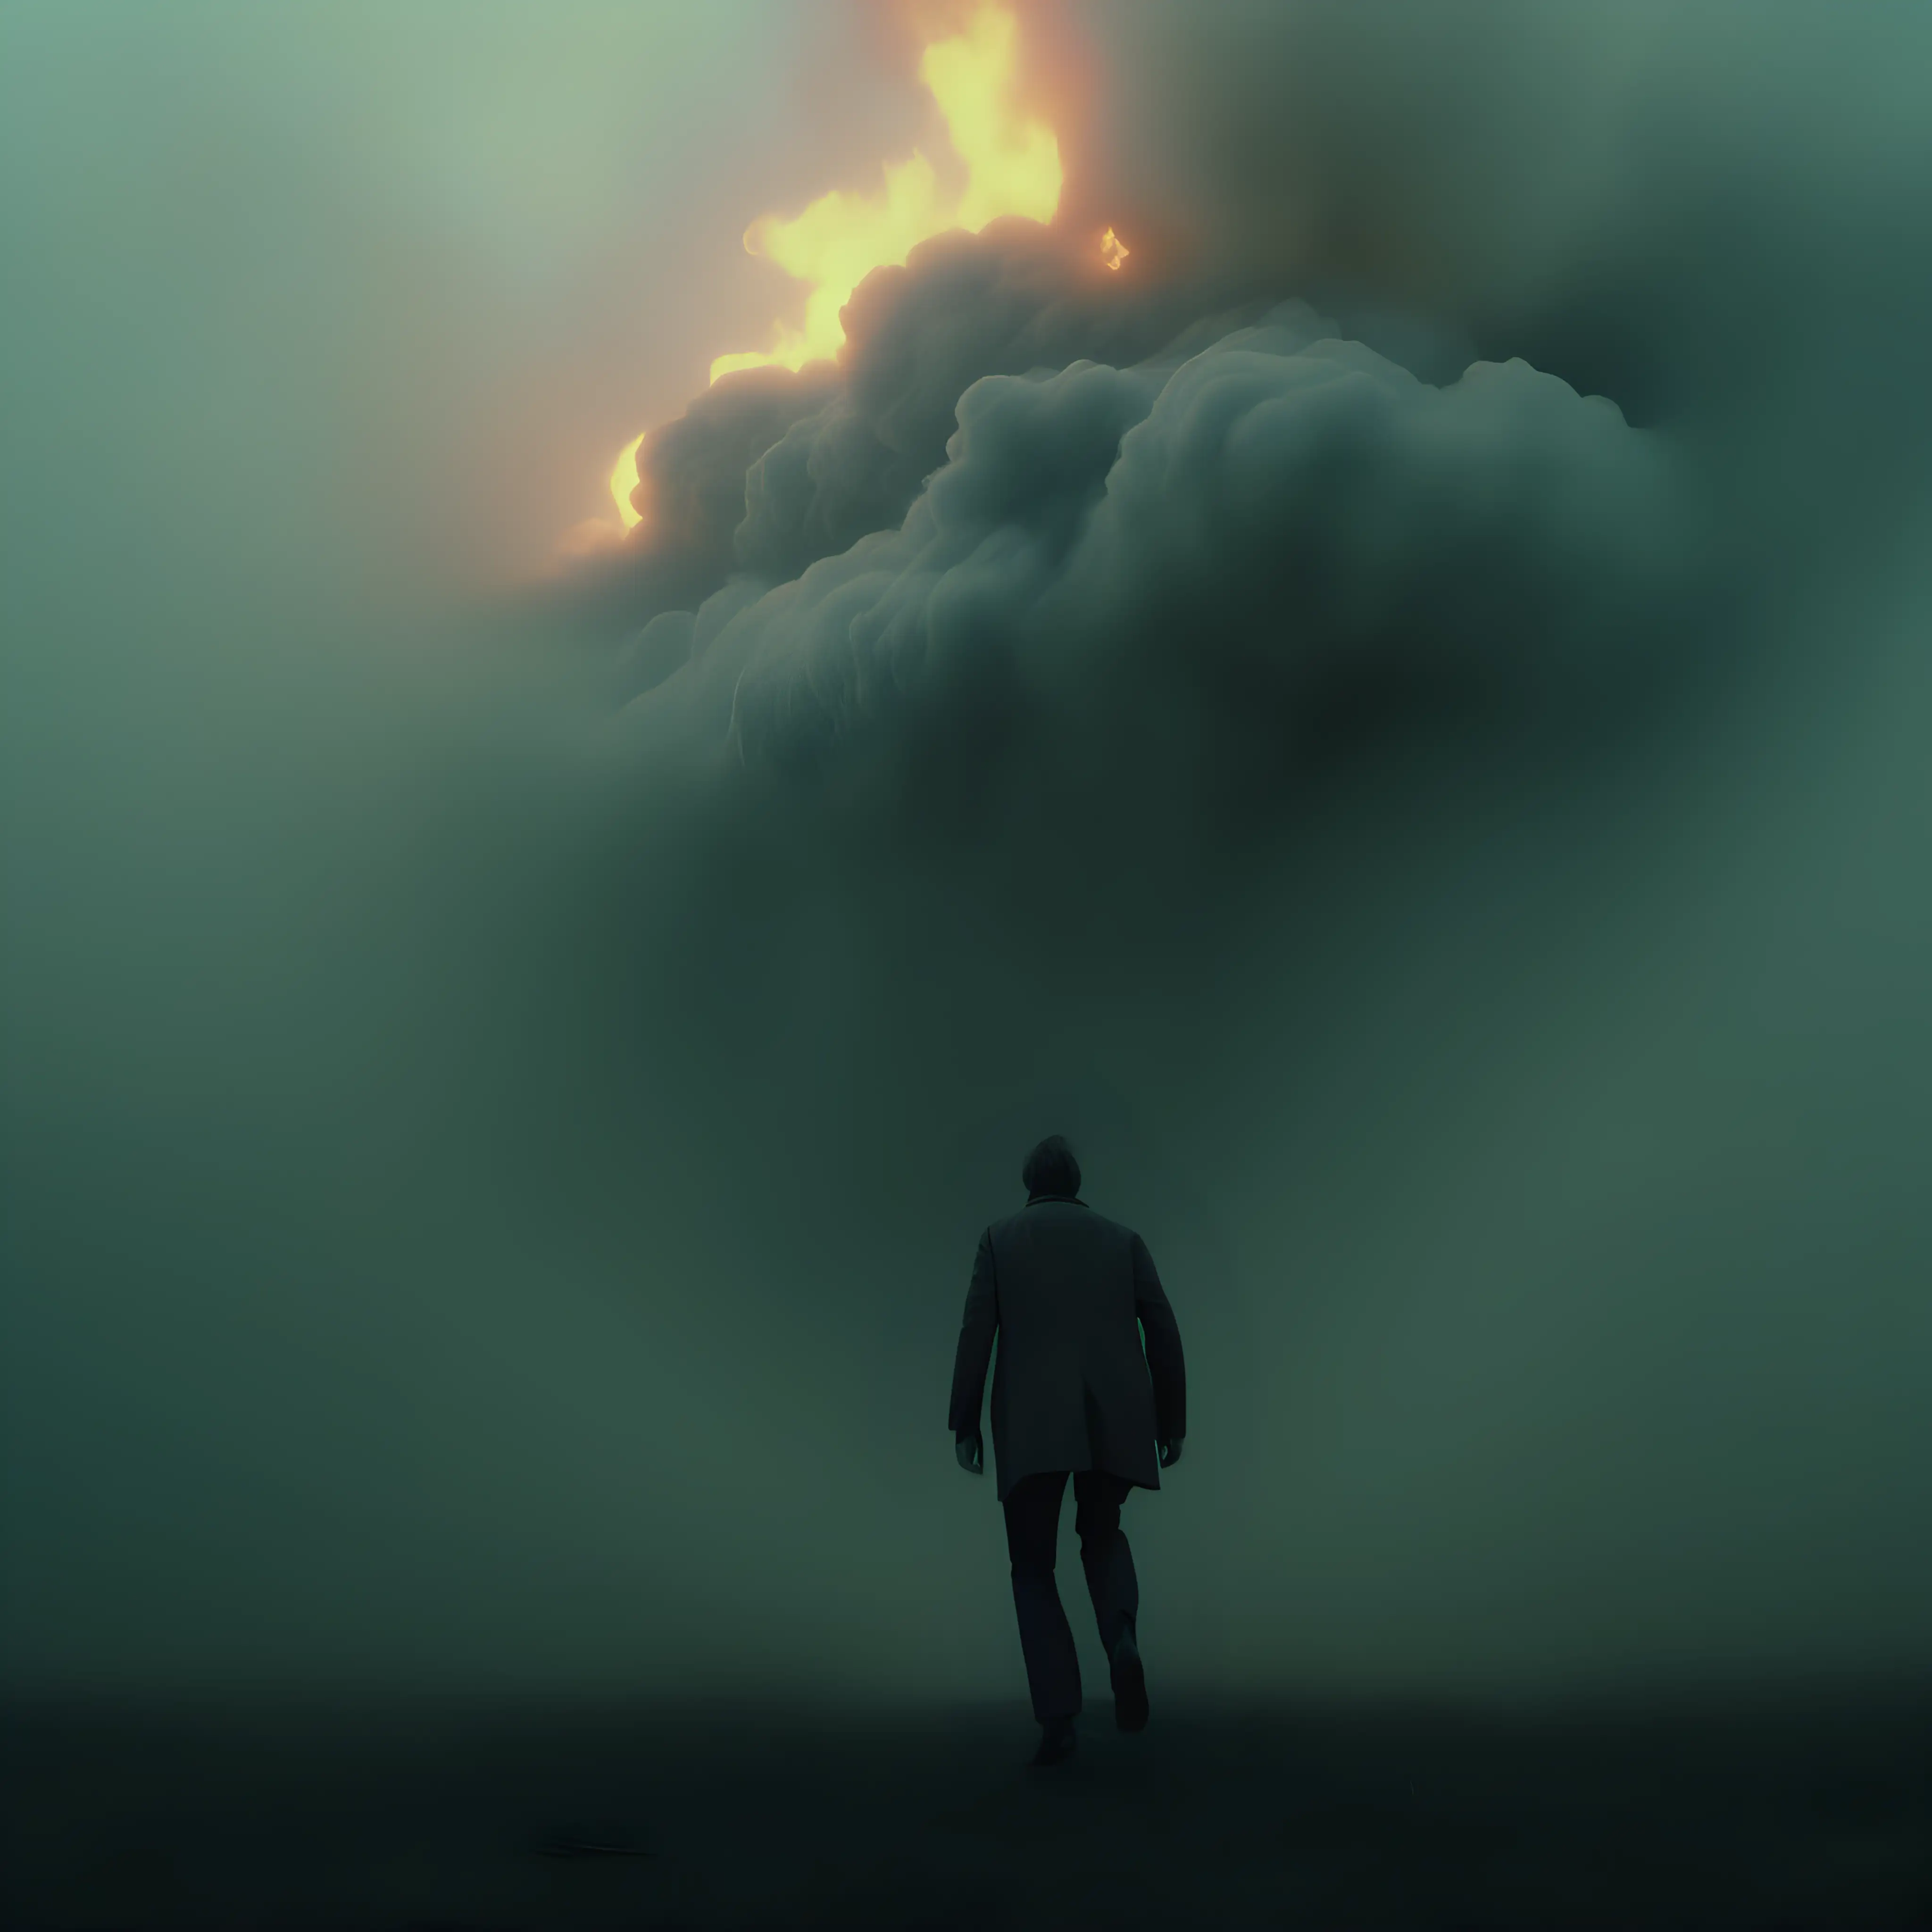 experimental cinematography, dystopian realism, made of mist, expansive skies, transavanguardia, movie still, very foggy, clouds, burning sky, a man falling from the sky